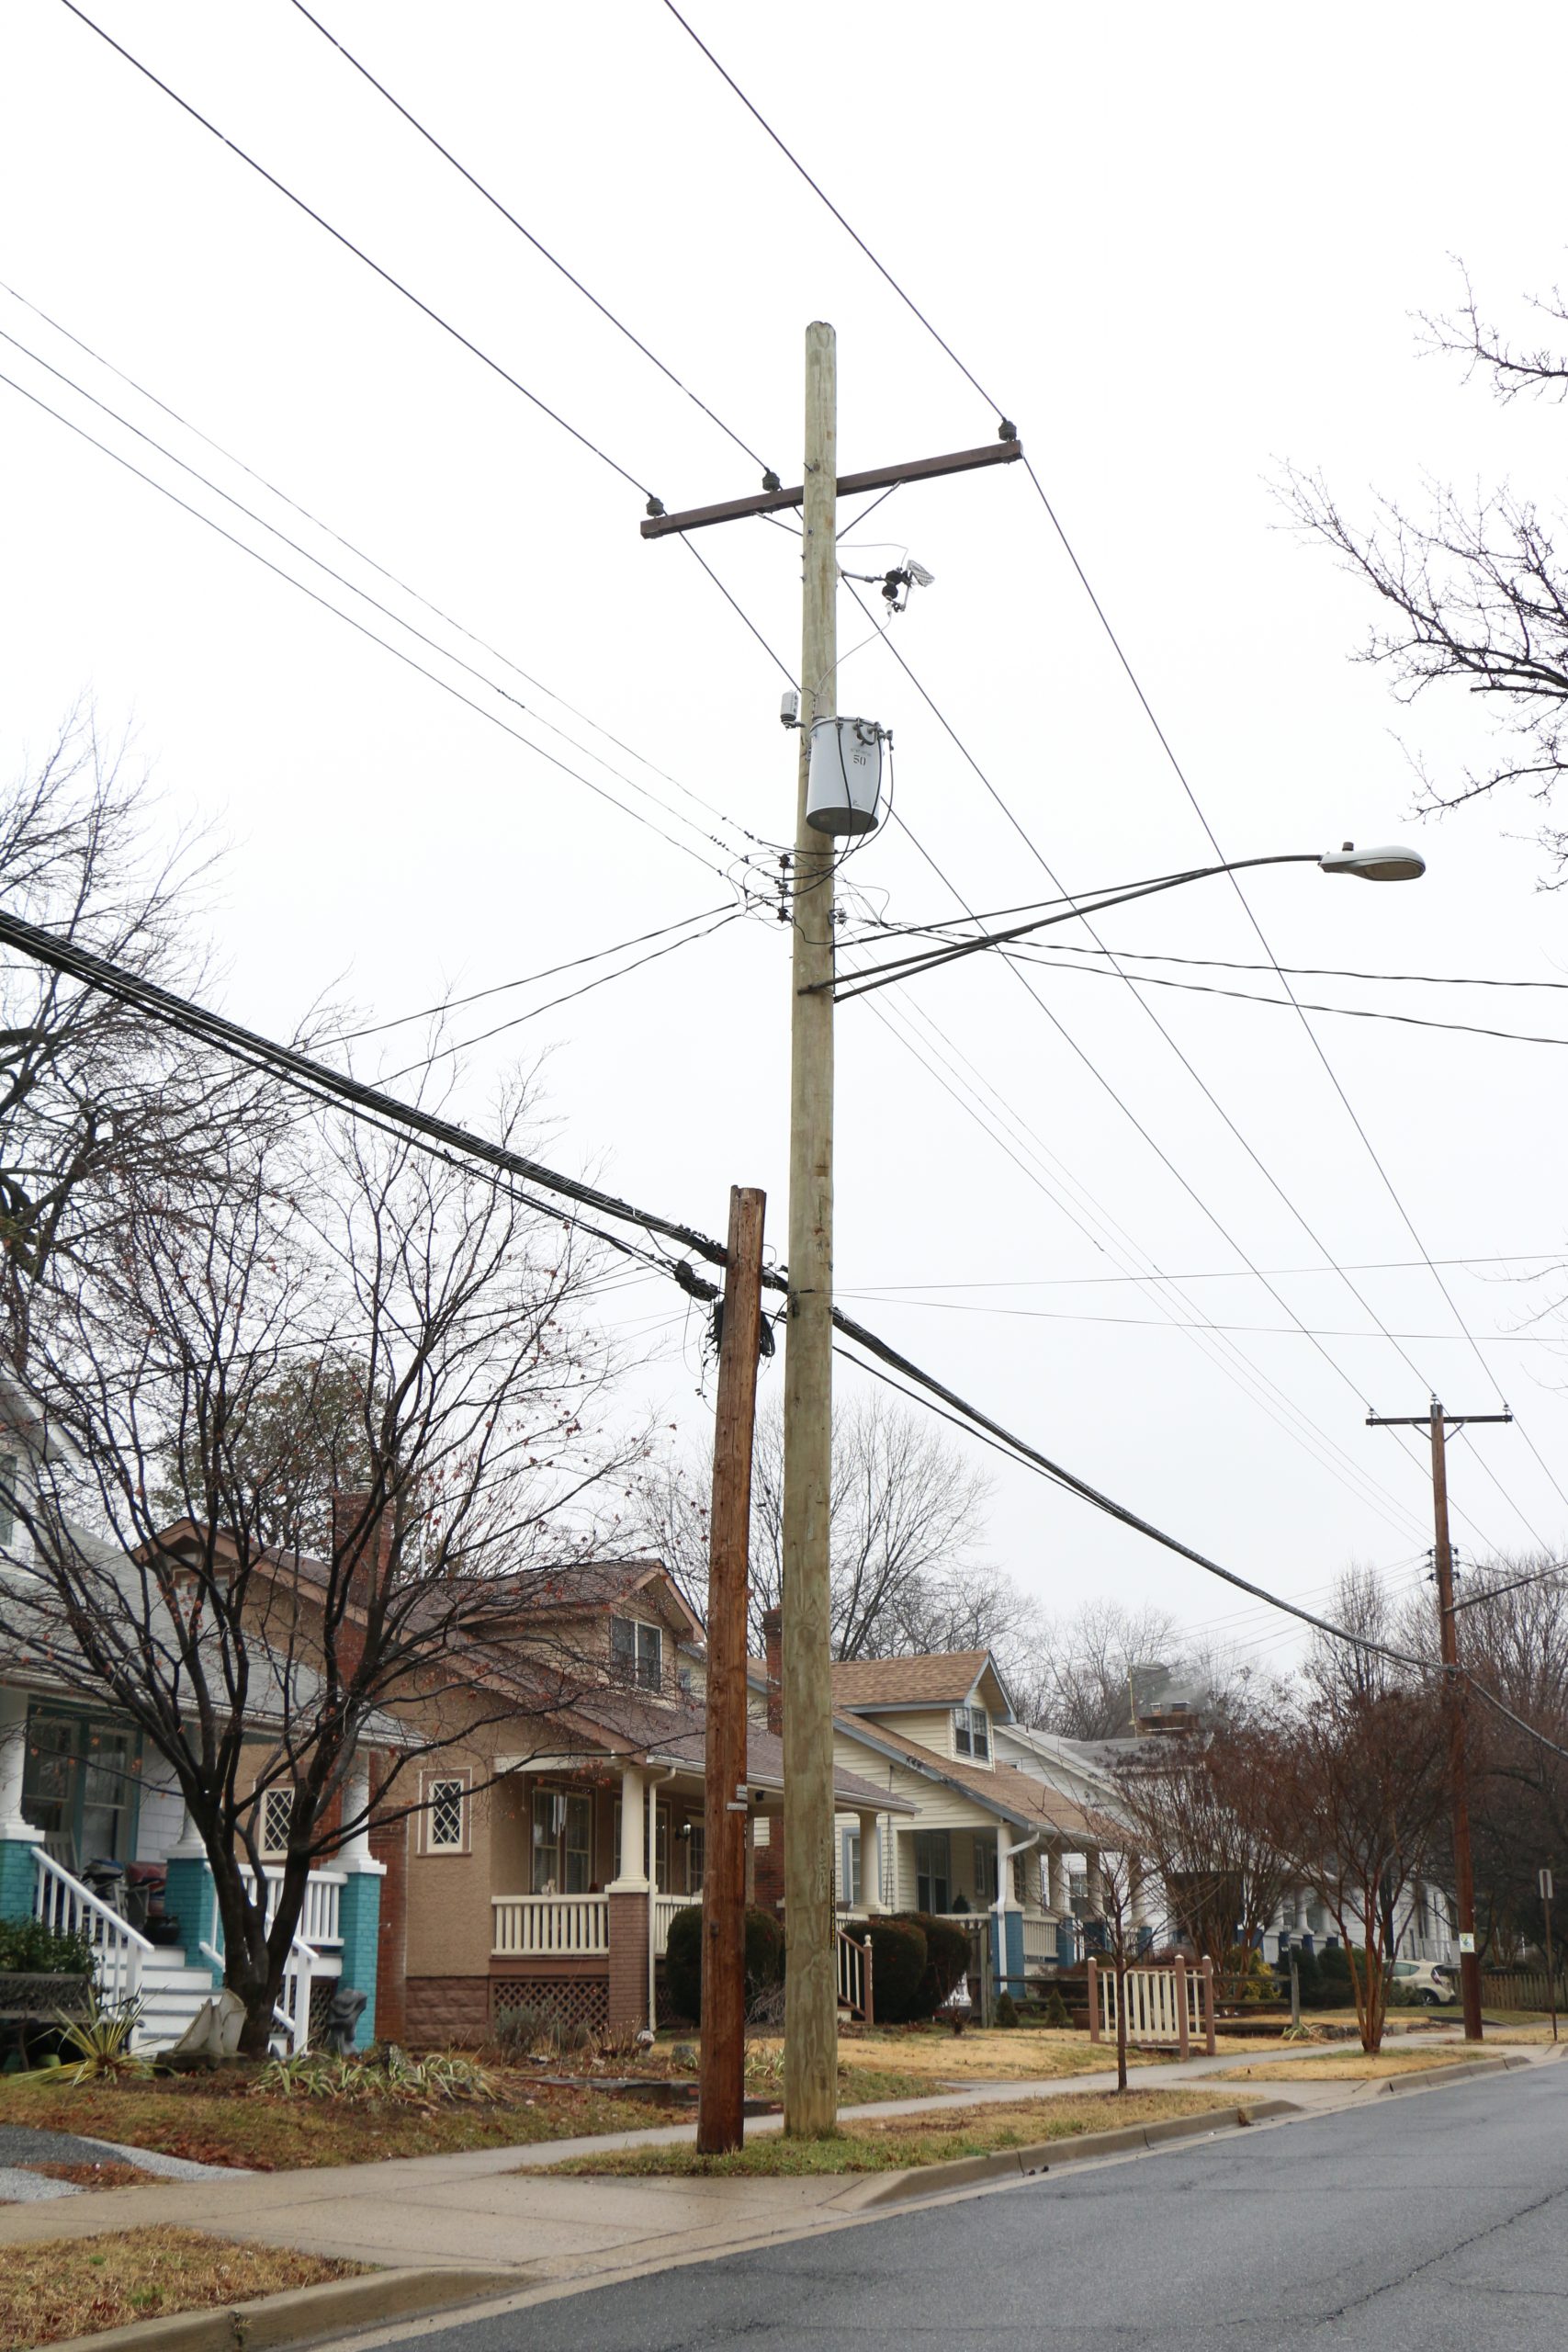 The science of the city: Reading between the power lines